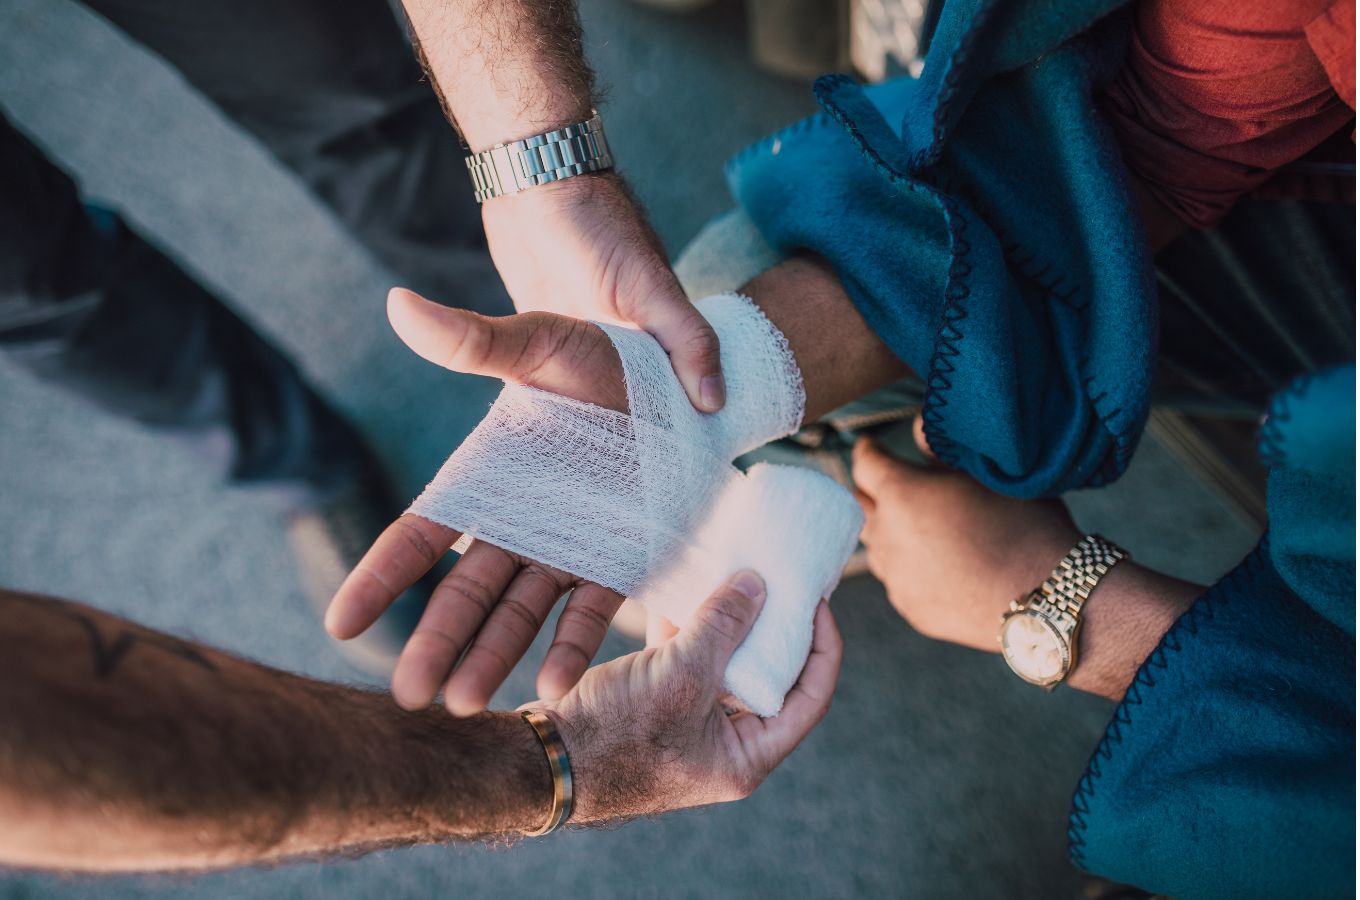 Hands shown wrapping a bandage around someone's palm